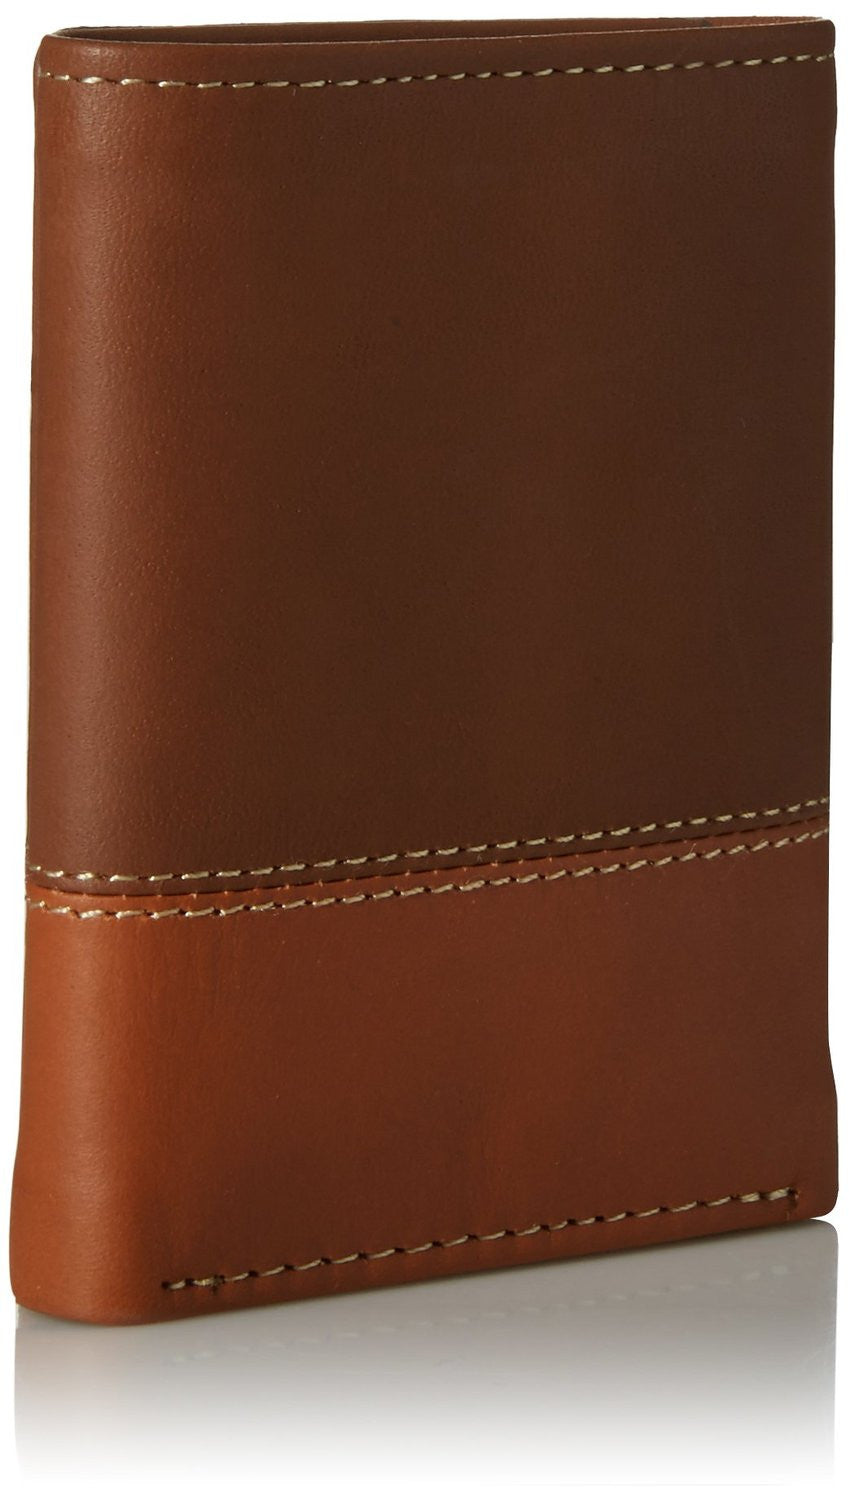 Timberland Men's Hunter Colorblocked Trifold Wallet